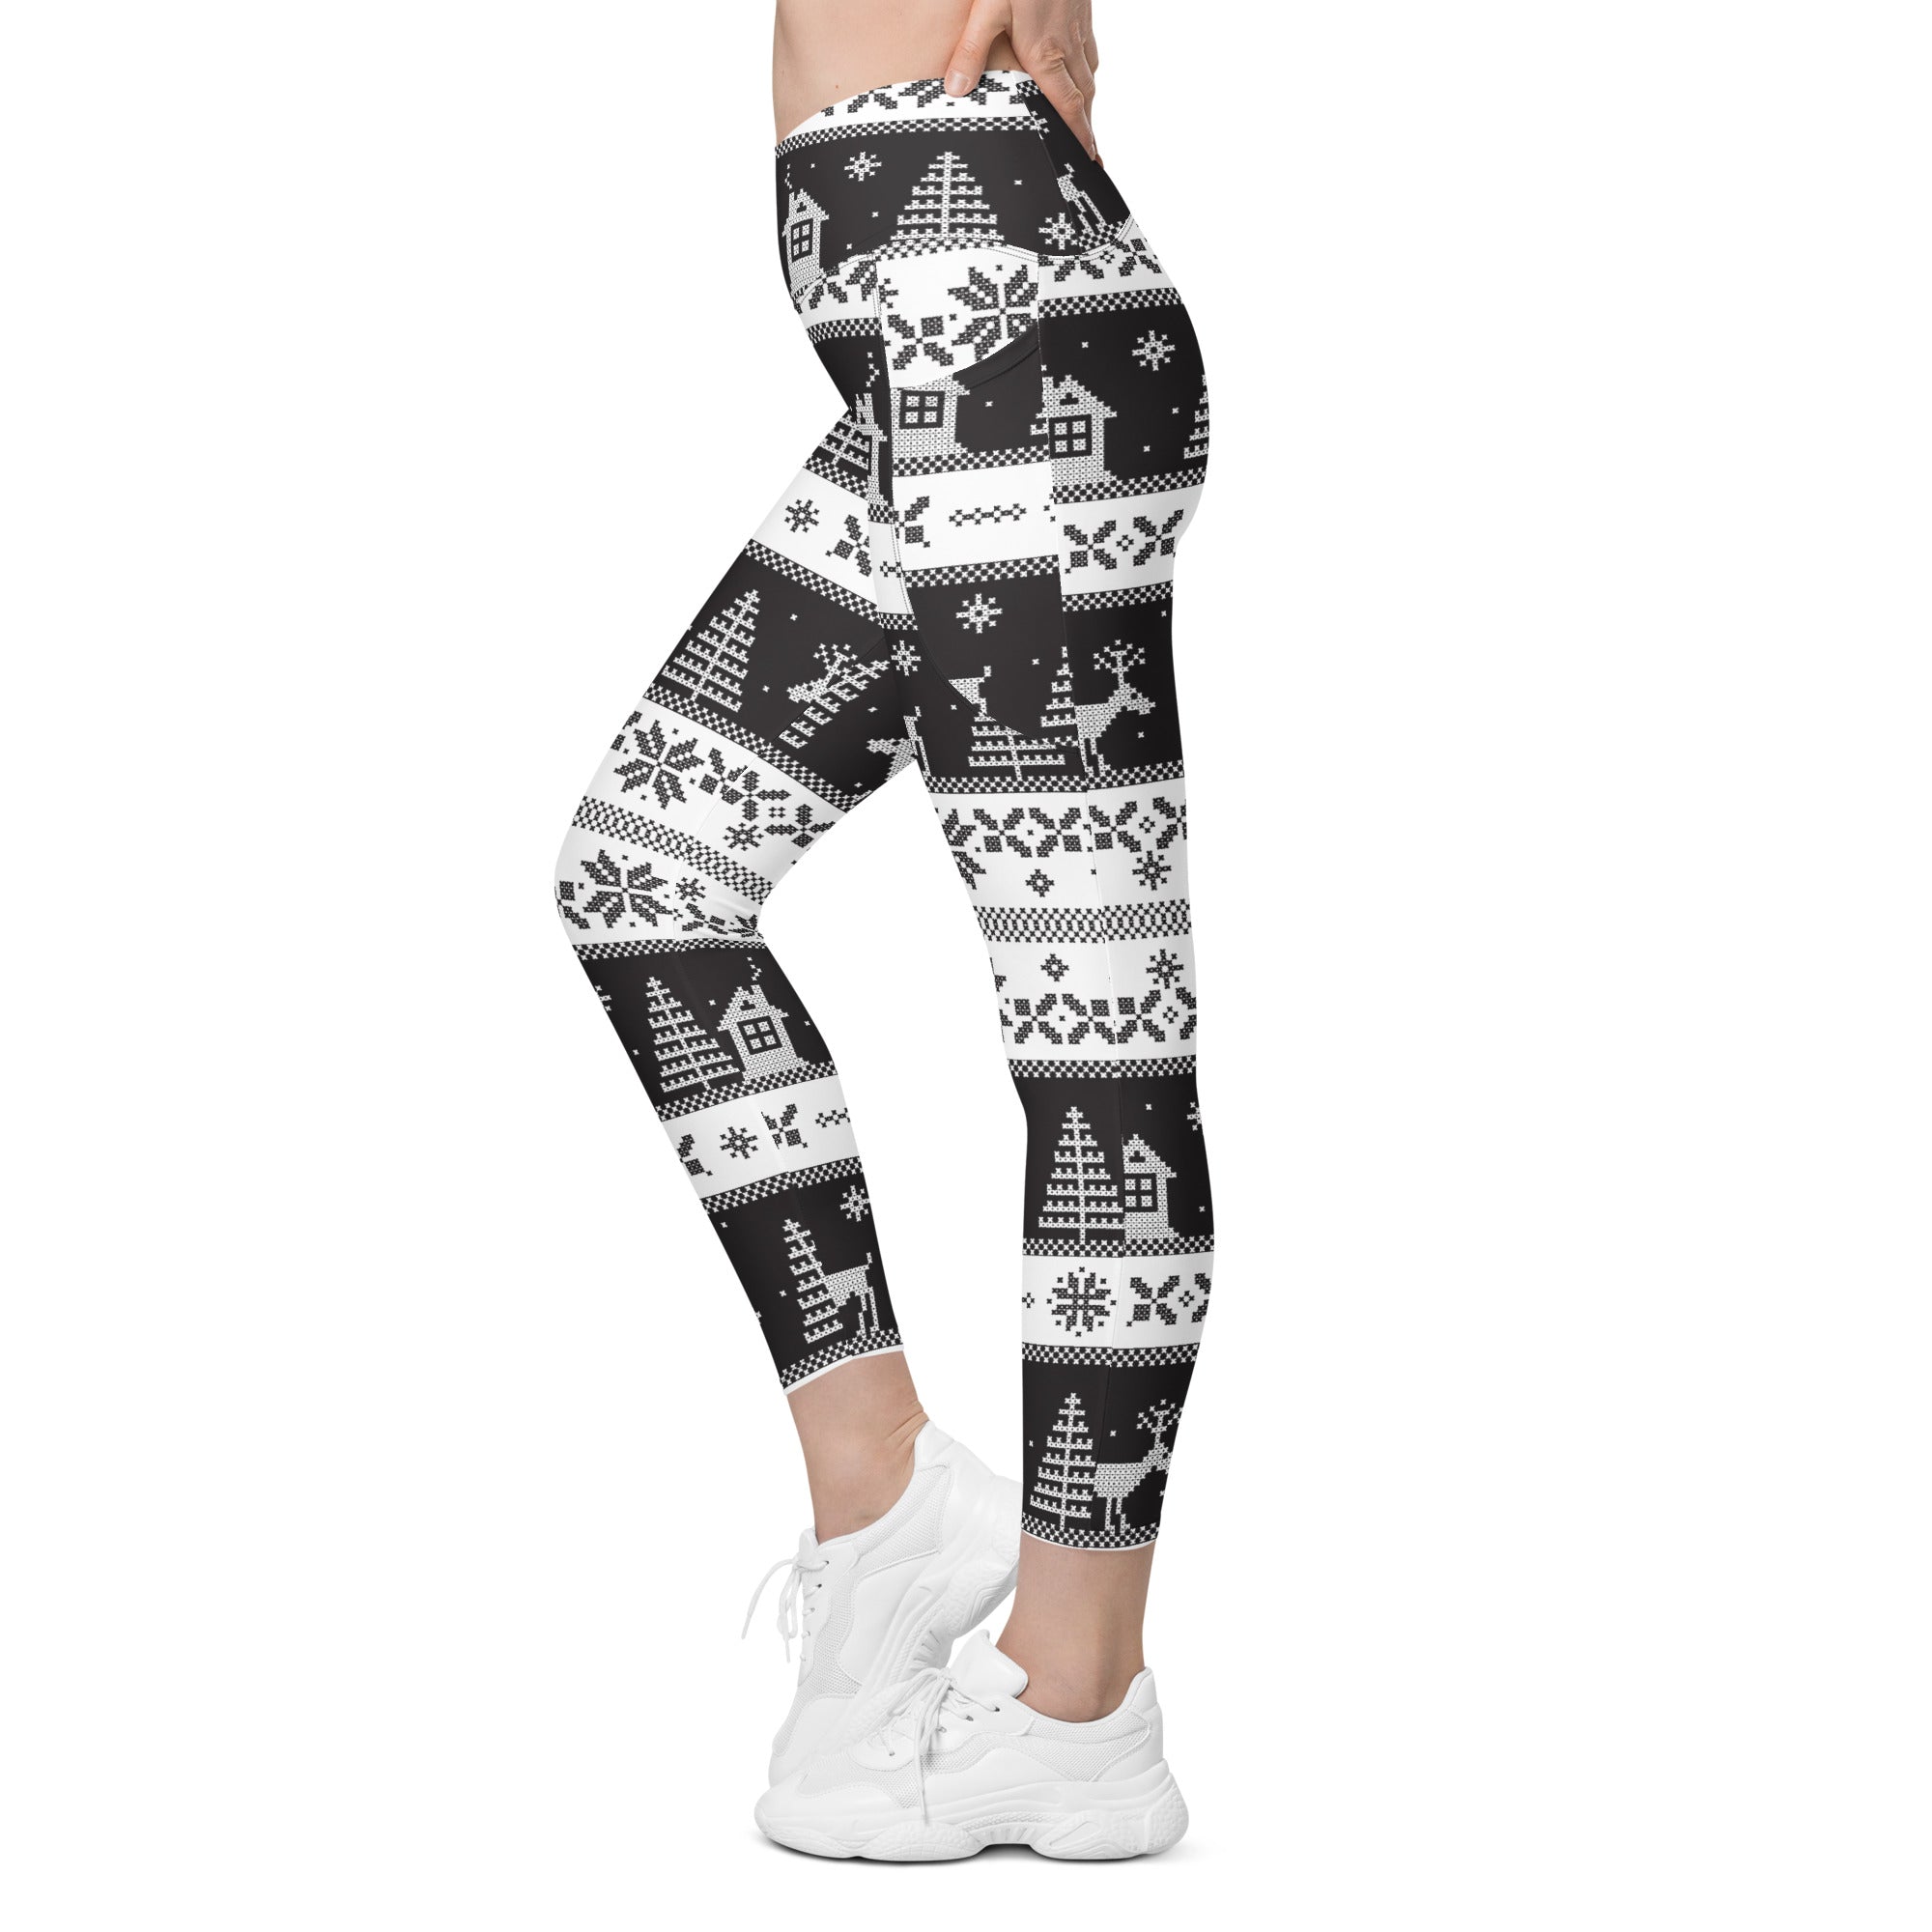 Vintage Black & White Christmas Crossover Leggings With Pockets